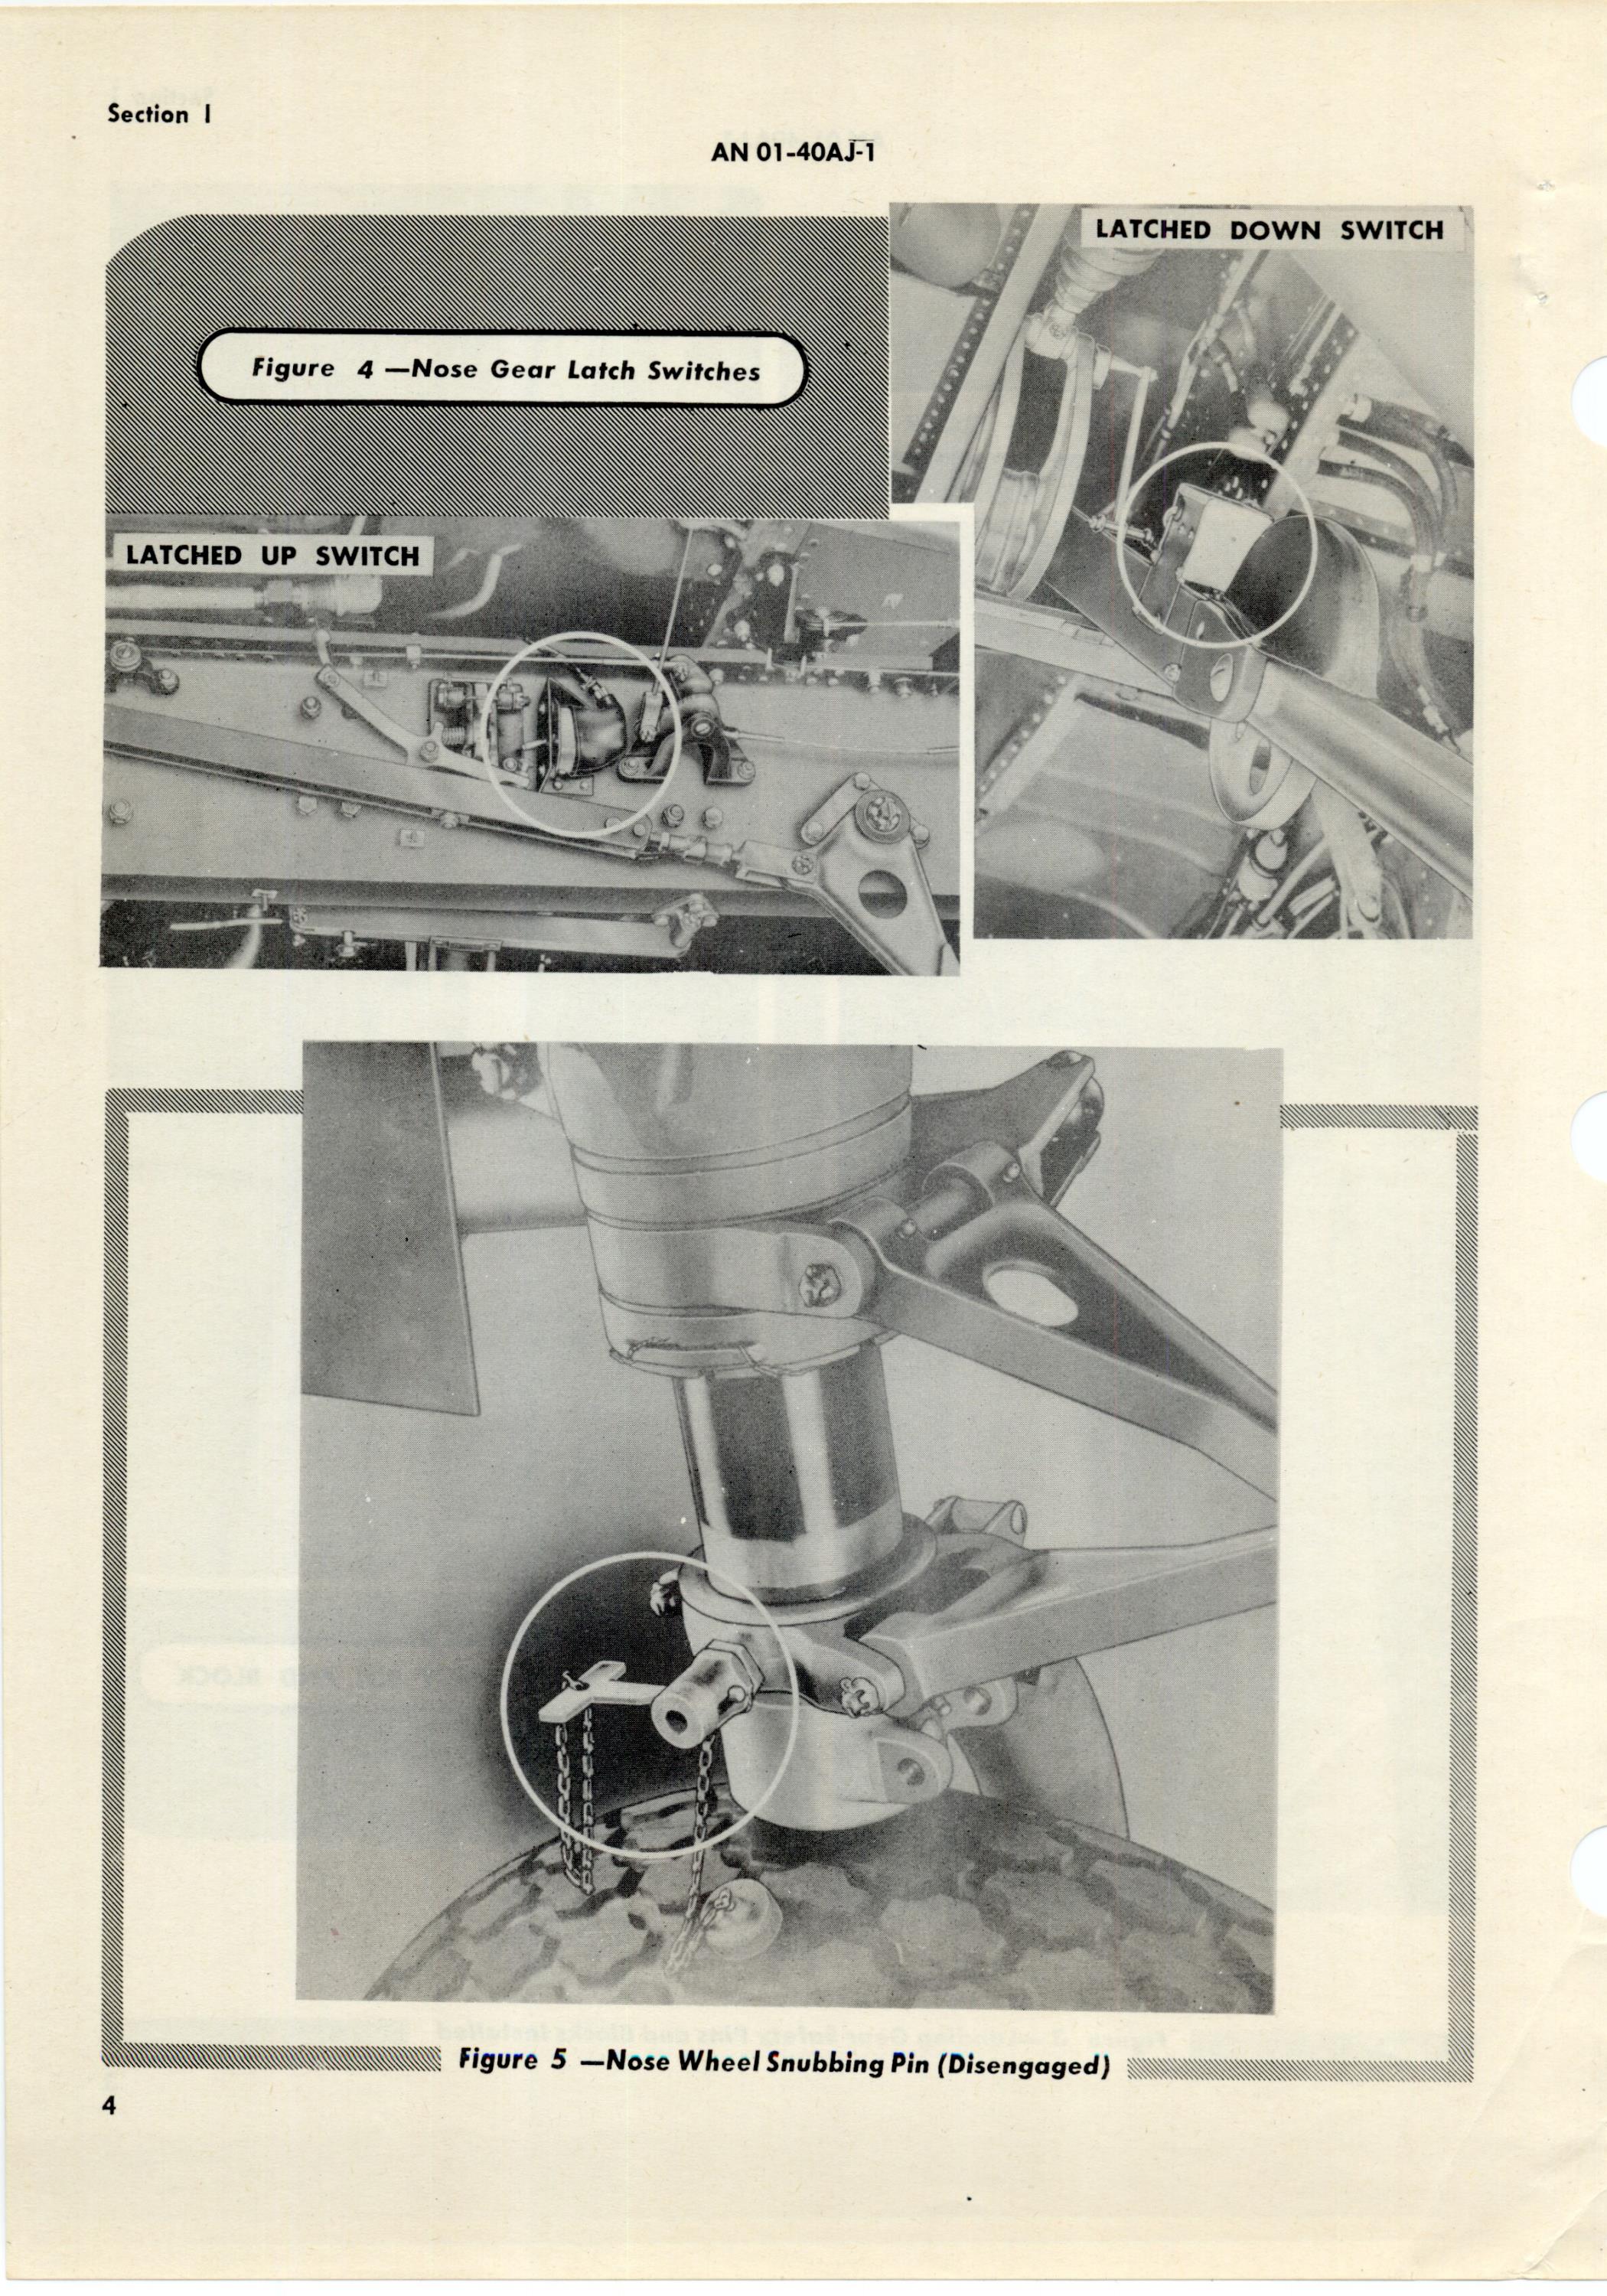 Sample page 10 from AirCorps Library document: Flight Operating Instructions for B-26B, B-26C, and JD-1